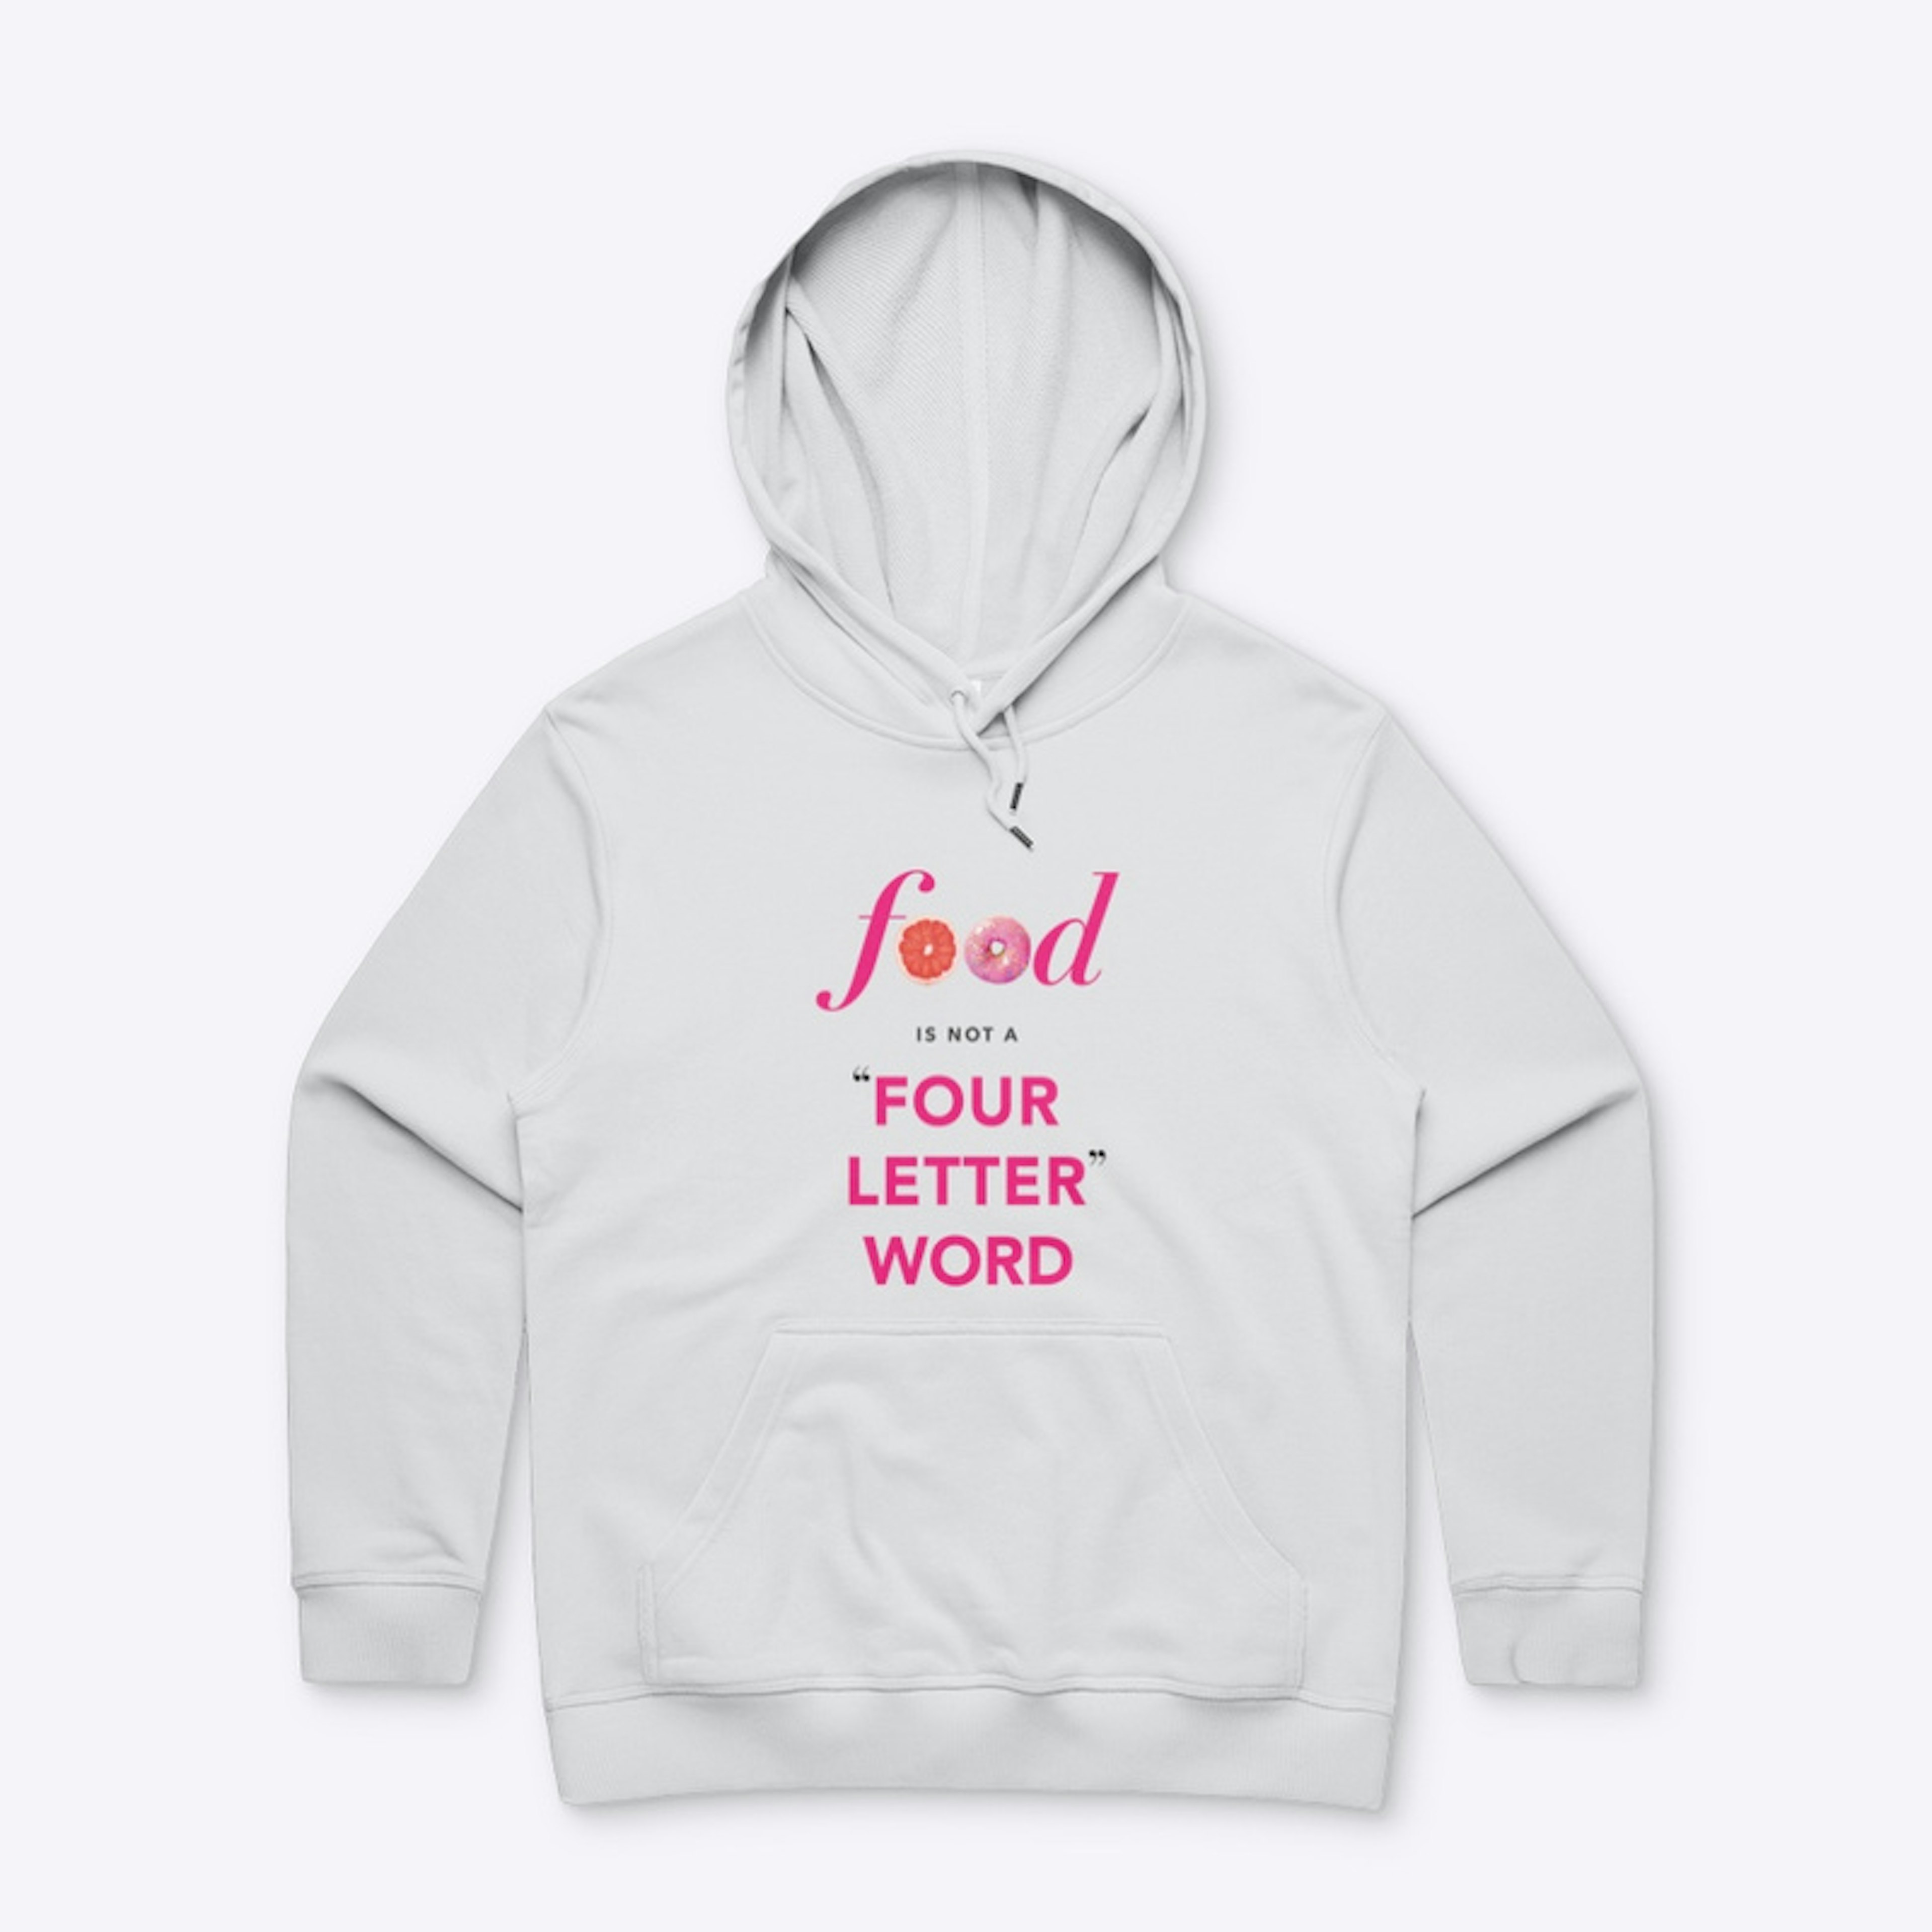 Food Is Not A "Four Letter" Word Hoodie